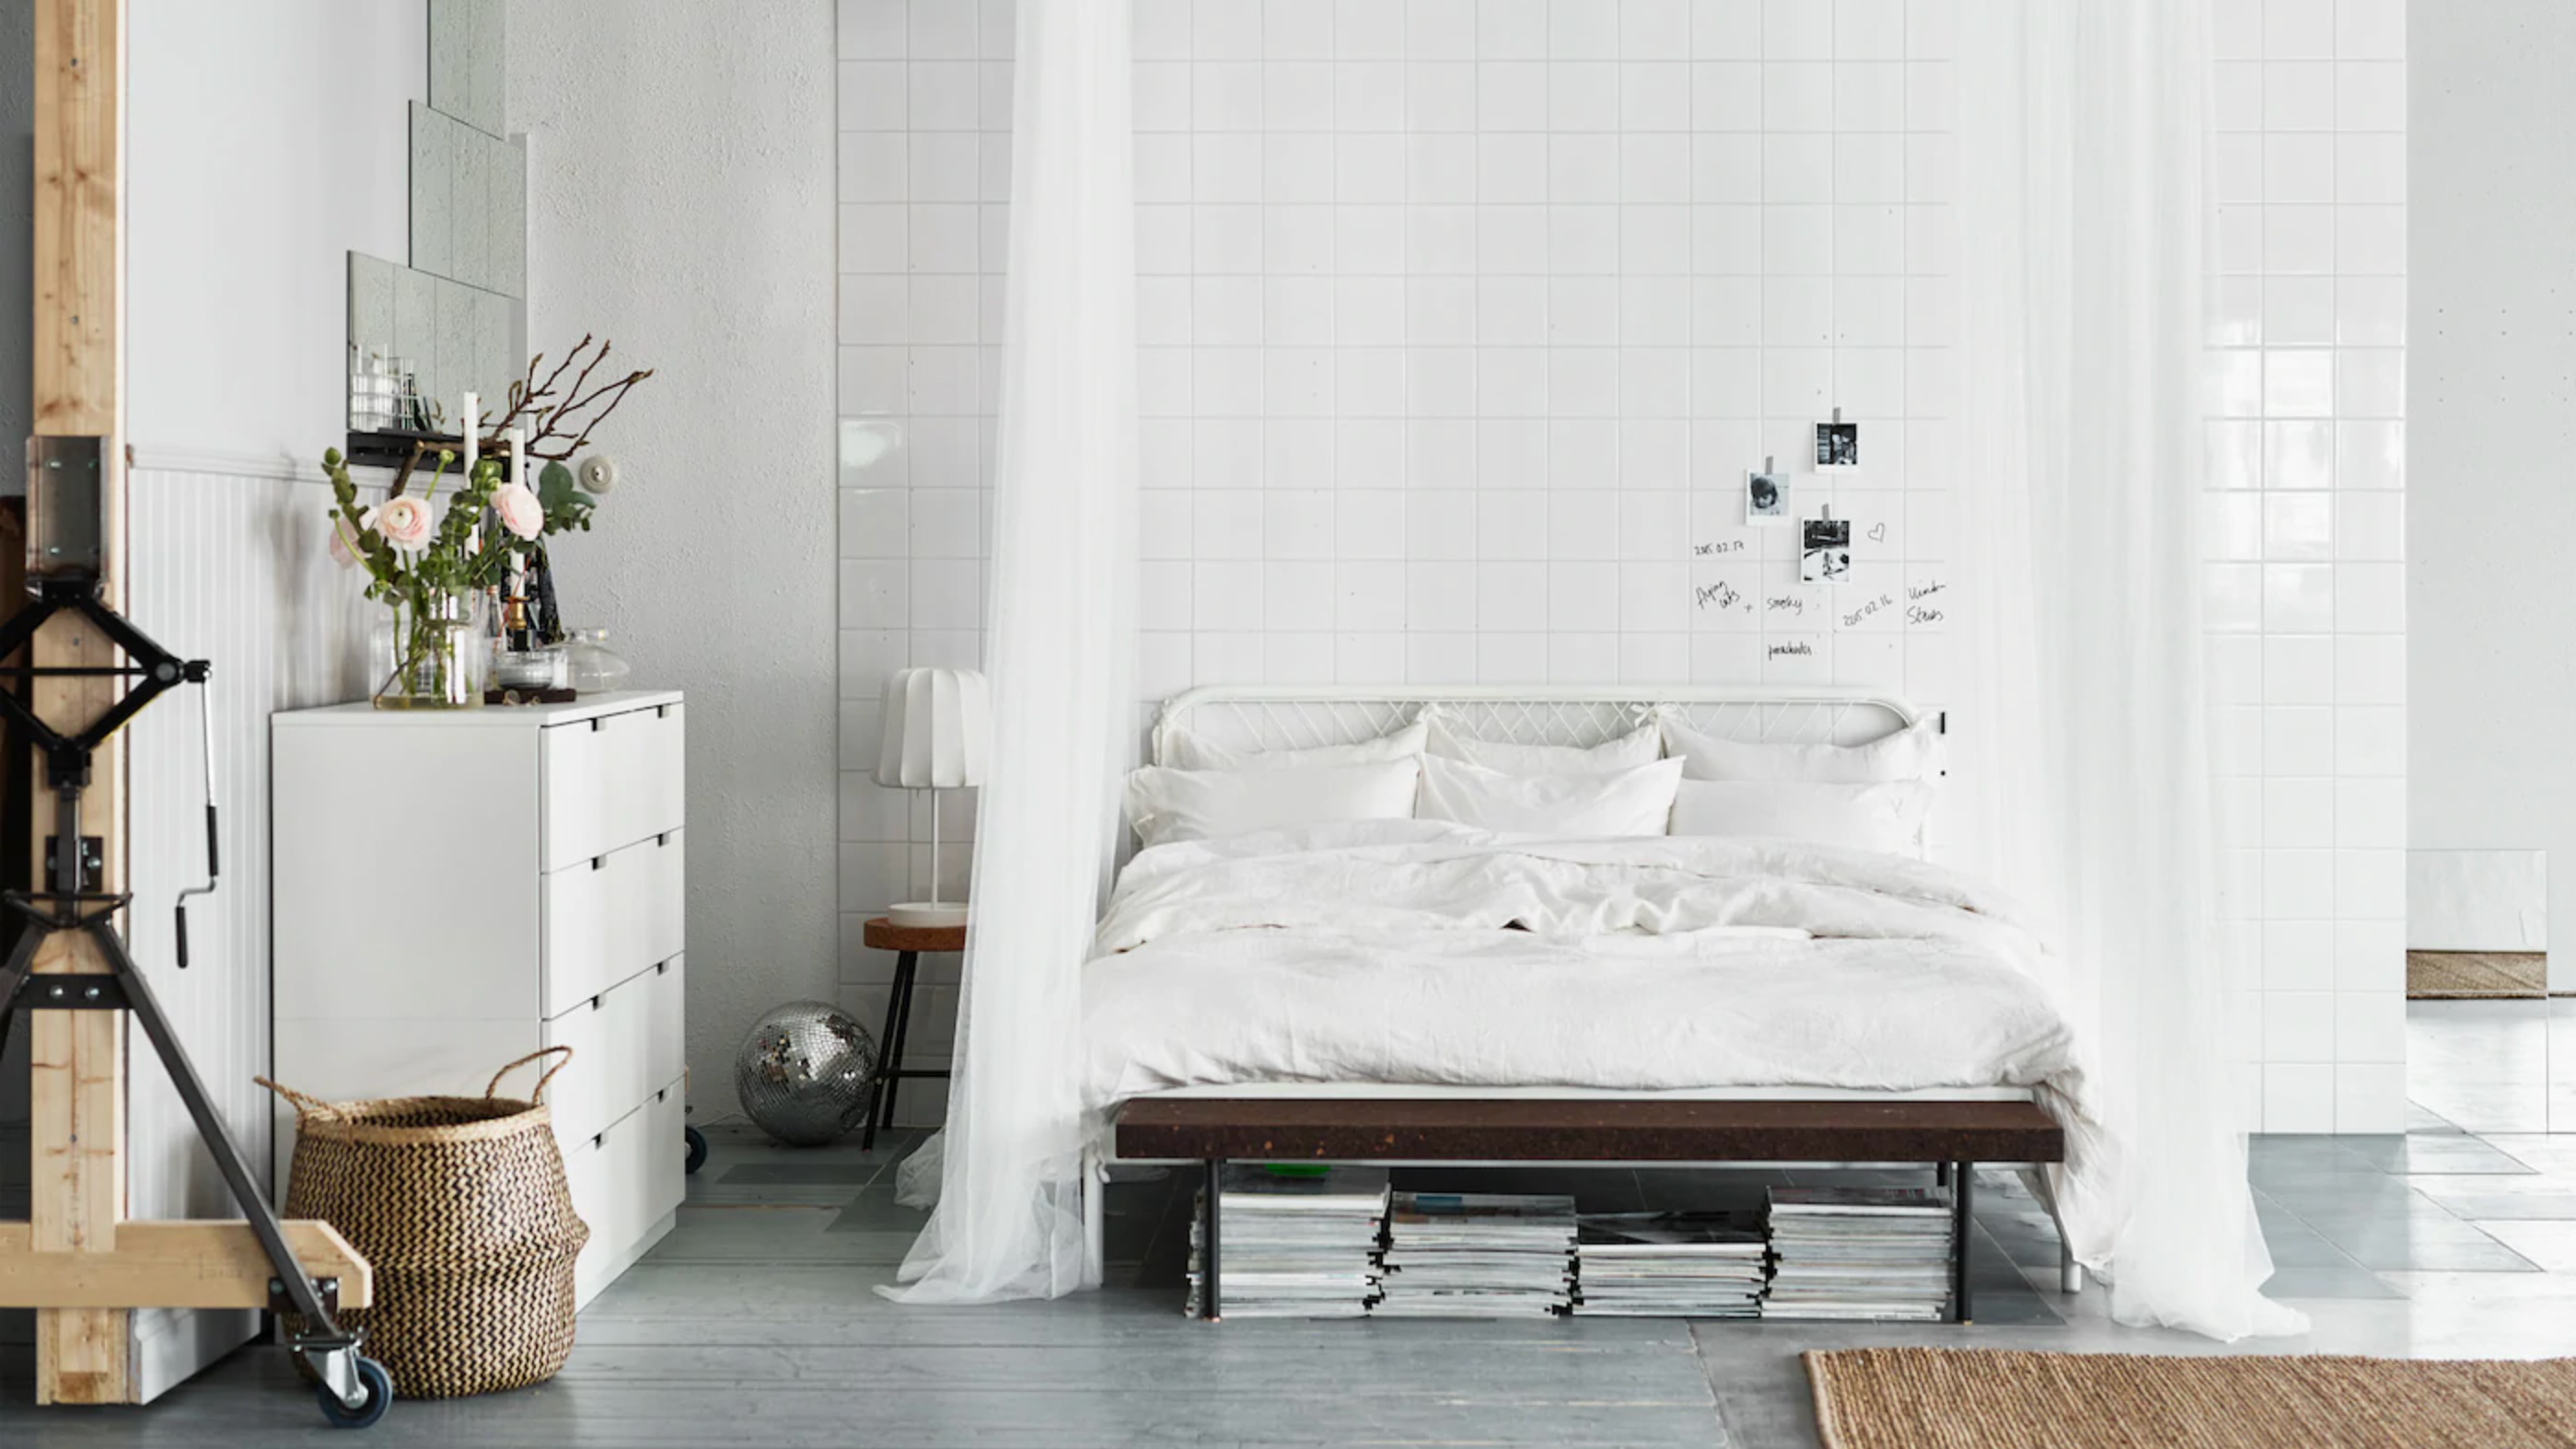 20 budget bedroom ideas for a cheap makeover that looks expensive ...